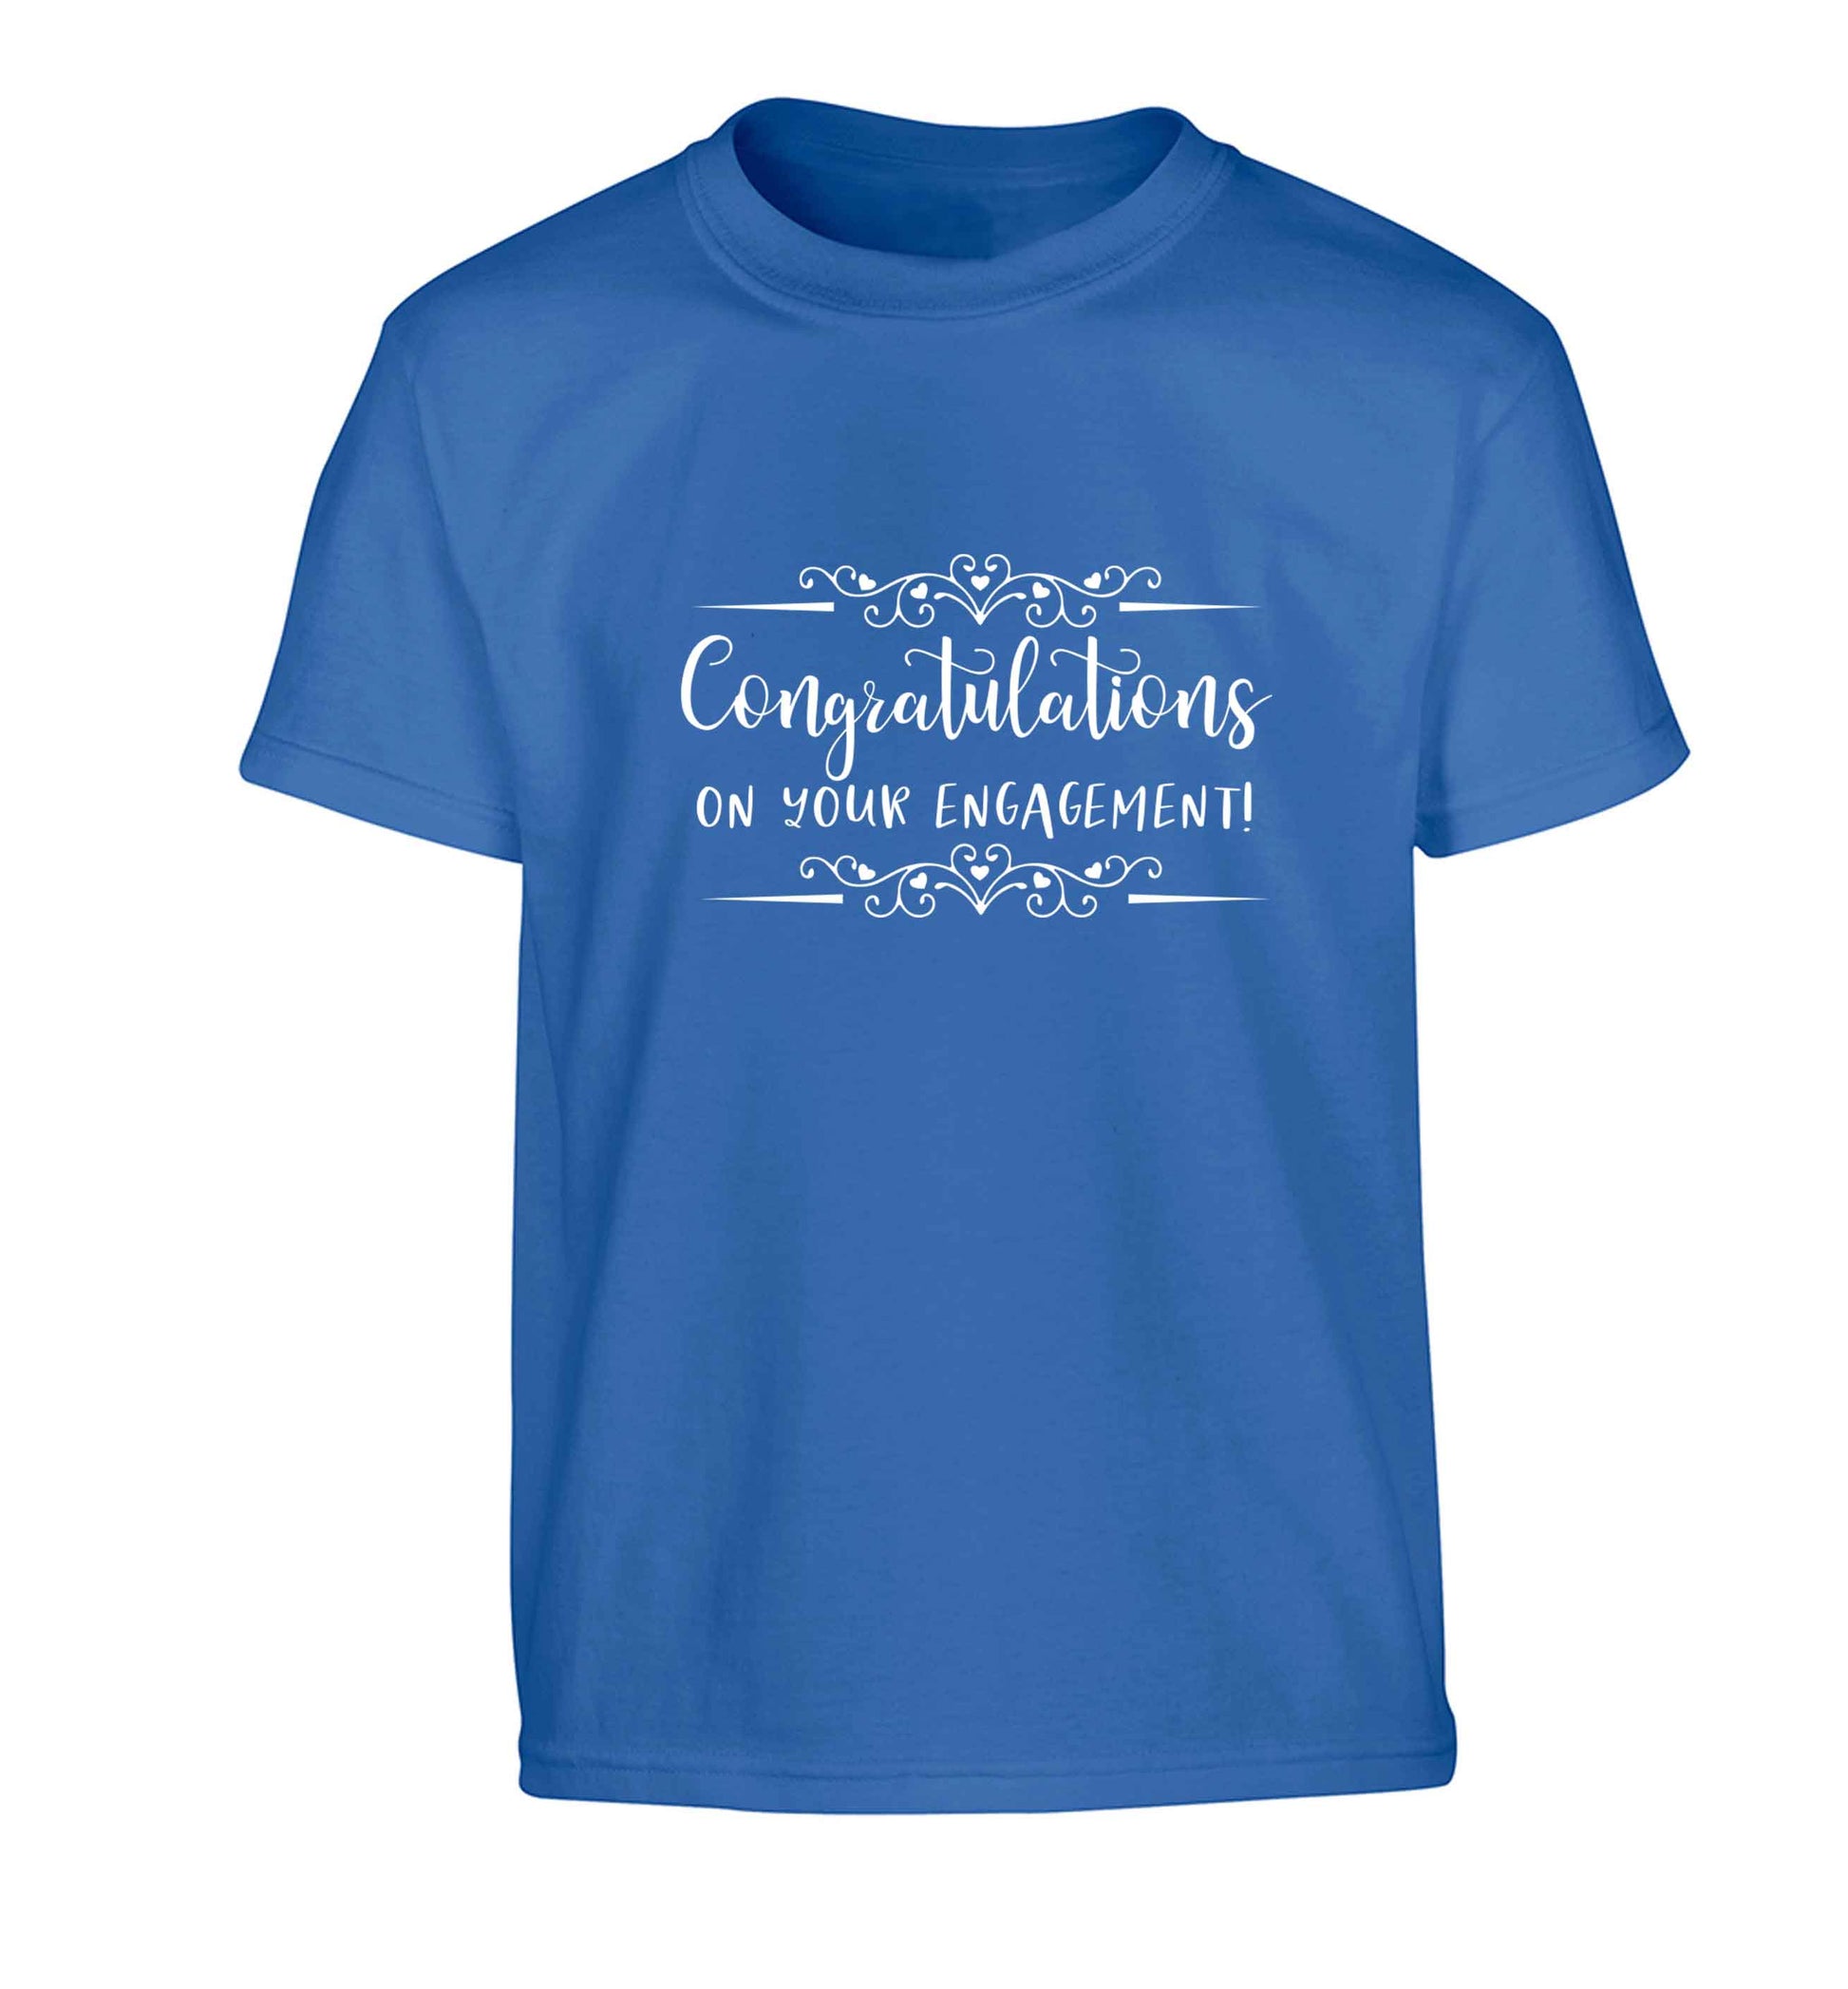 Congratulations on your engagement Children's blue Tshirt 12-13 Years